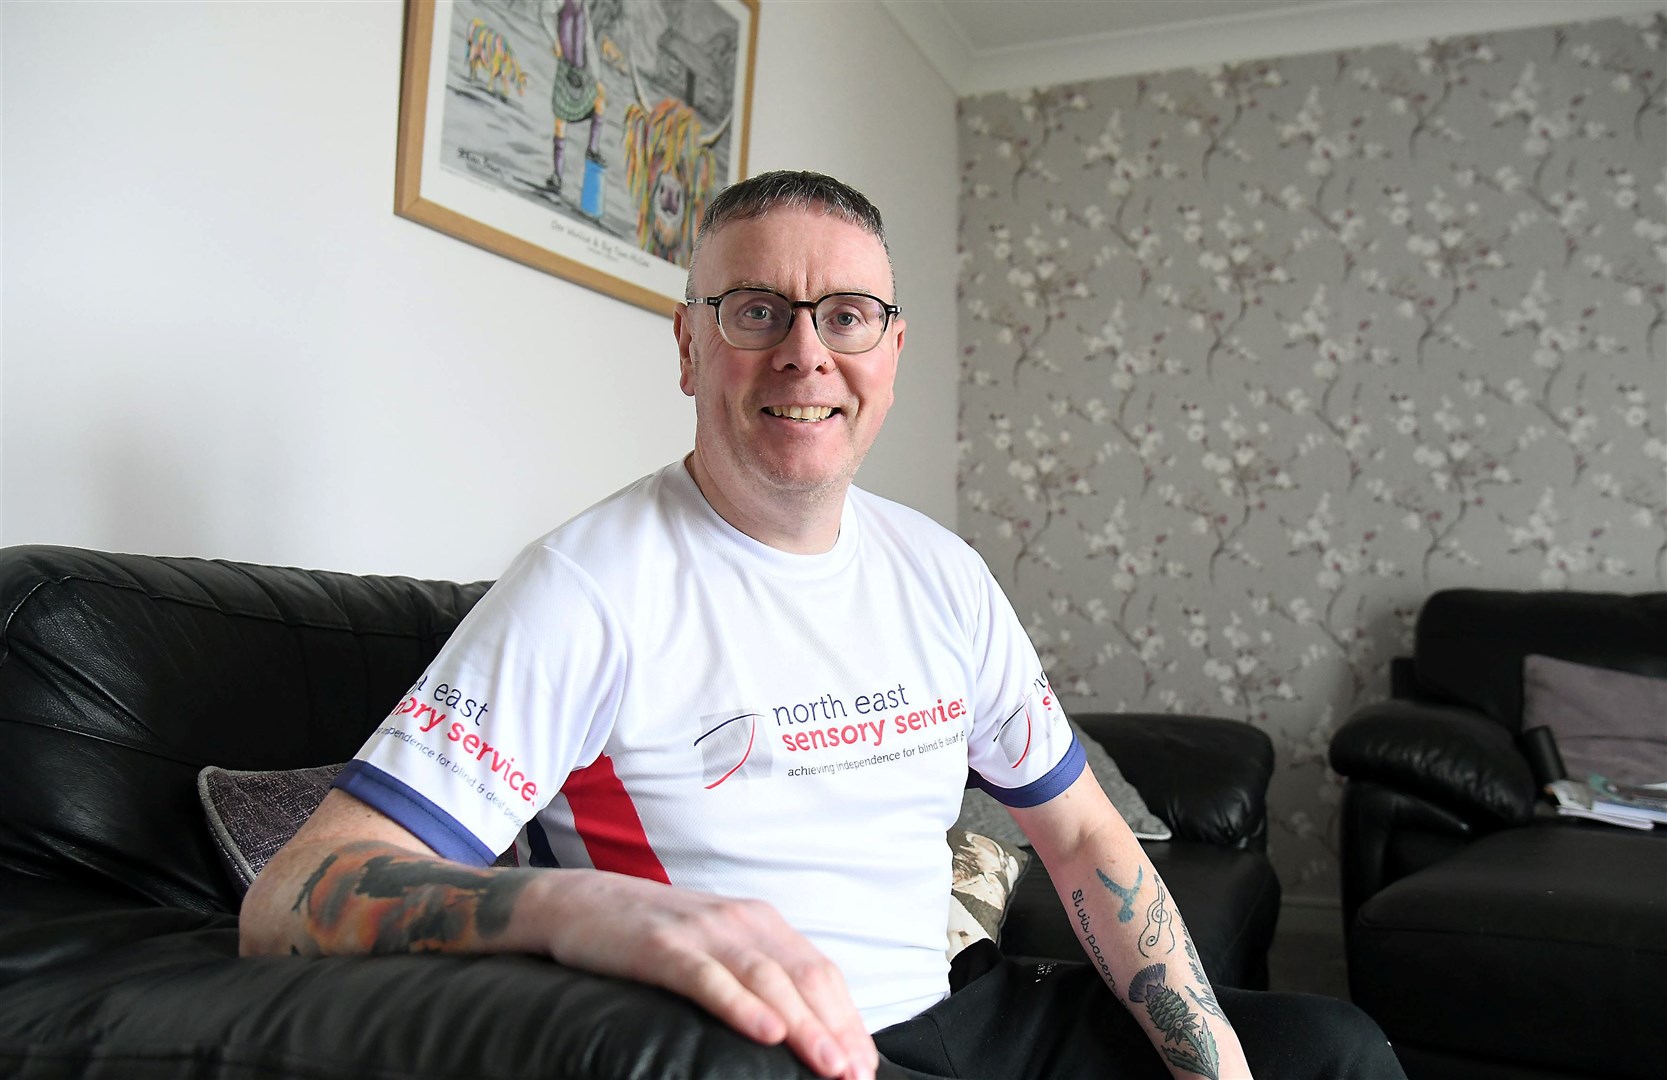 Garry Ritchie, who is visually impaired, will take on 'The Tube Challenge' next month to raise money for North East Sensory Services. Picture: Becky Saunderson.